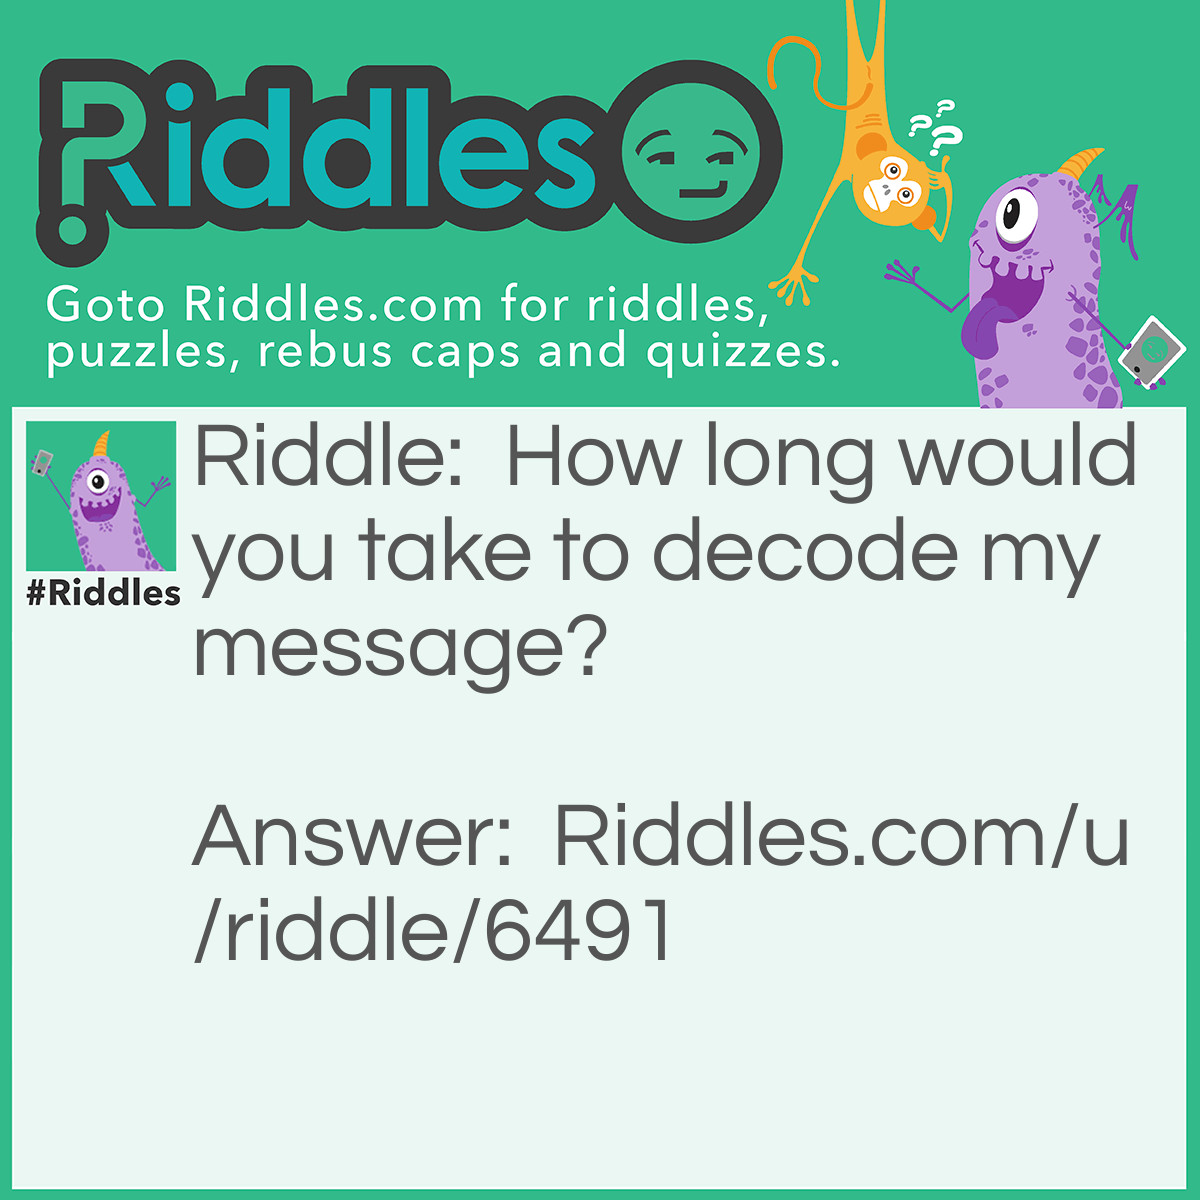 Riddle: How long would you take to decode my message? Answer: Don't know the answer